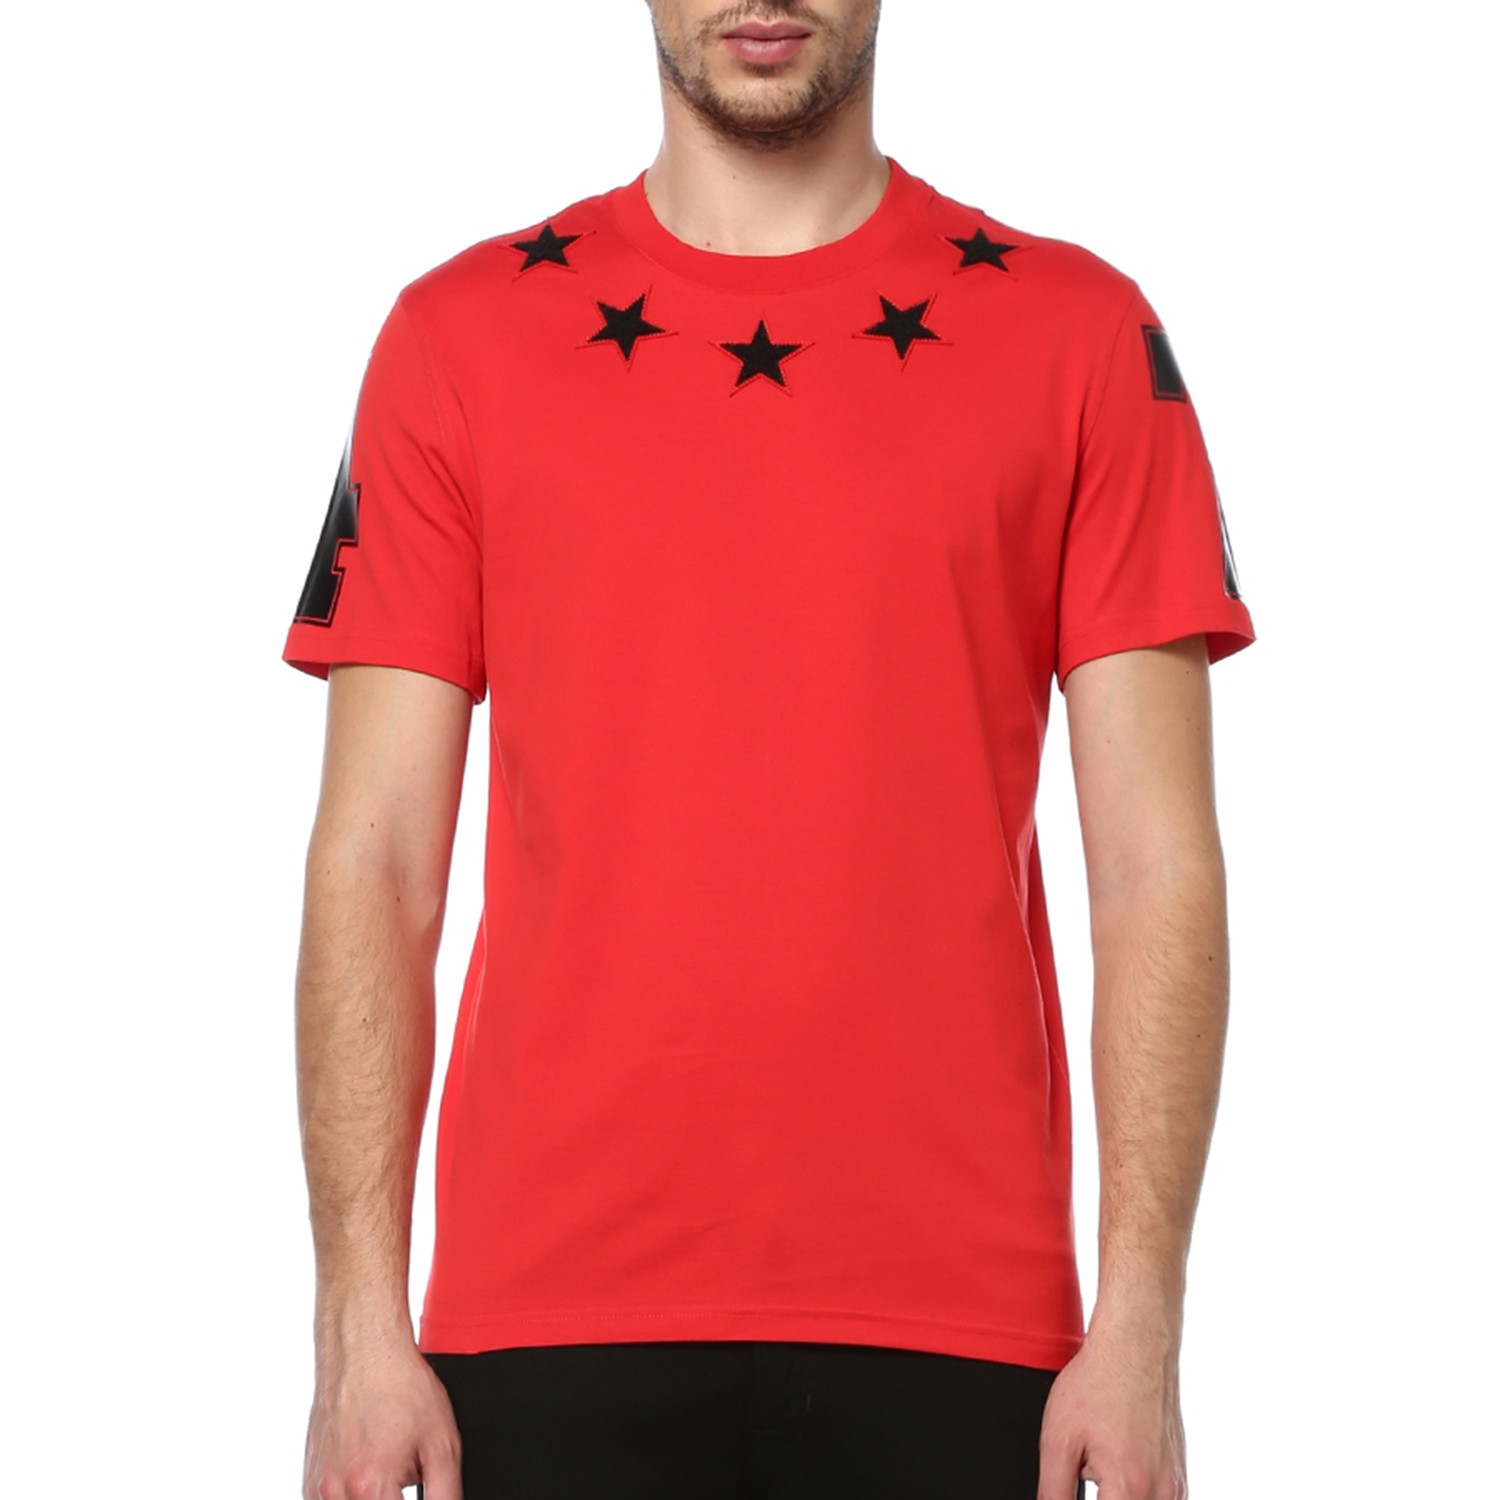 Buy givenchy 74 star t shirt - 53% OFF!